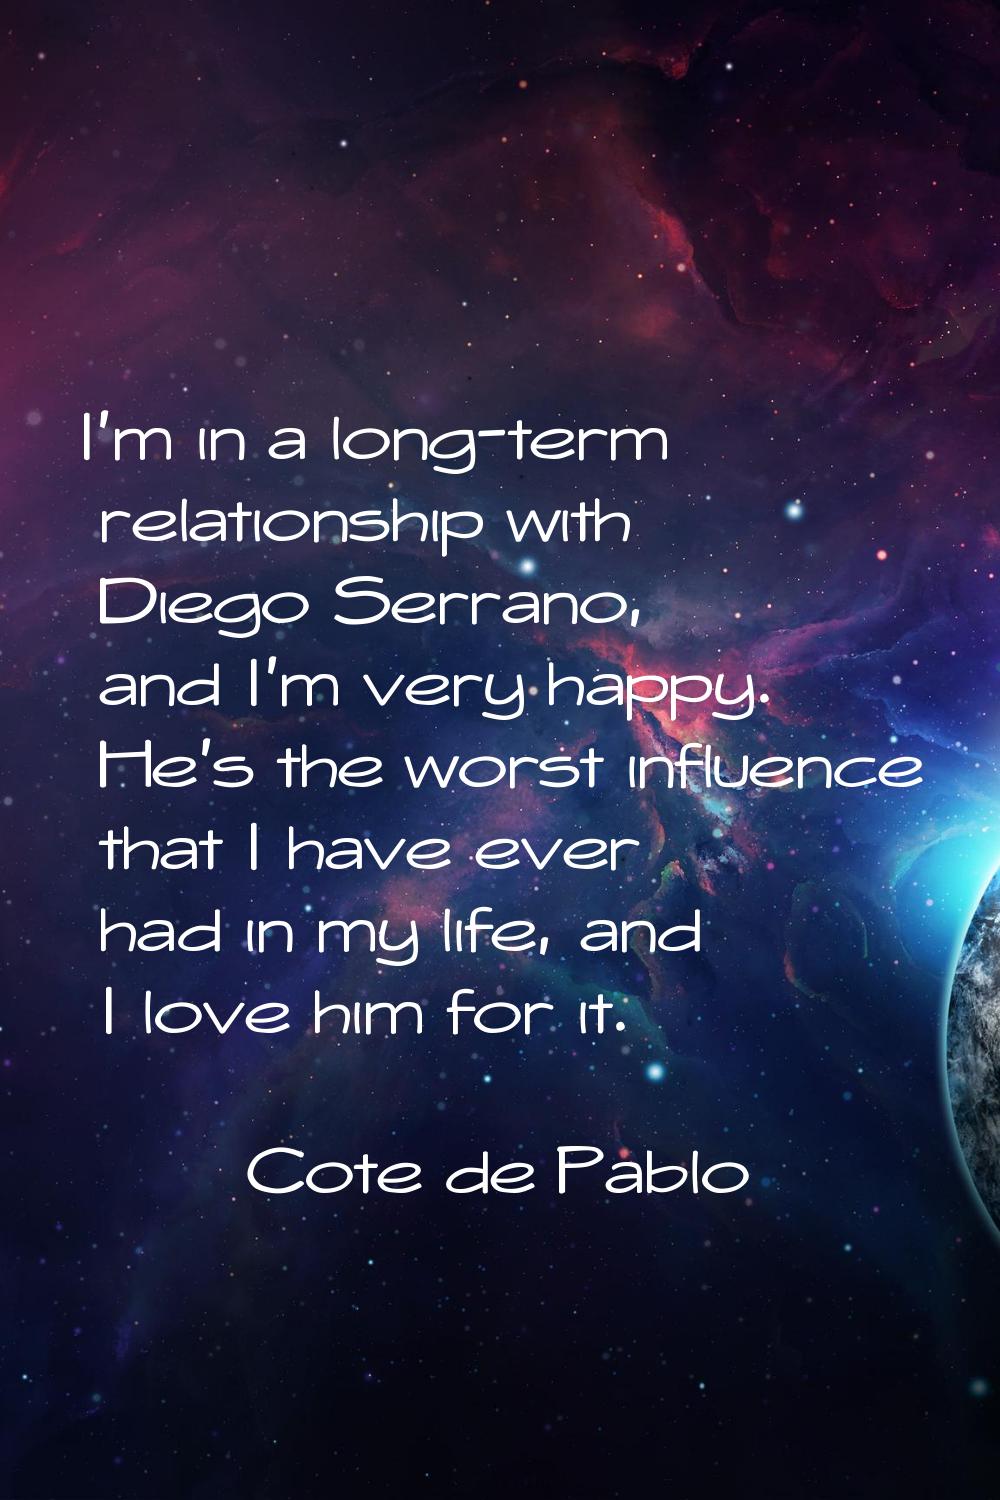 I'm in a long-term relationship with Diego Serrano, and I'm very happy. He's the worst influence th